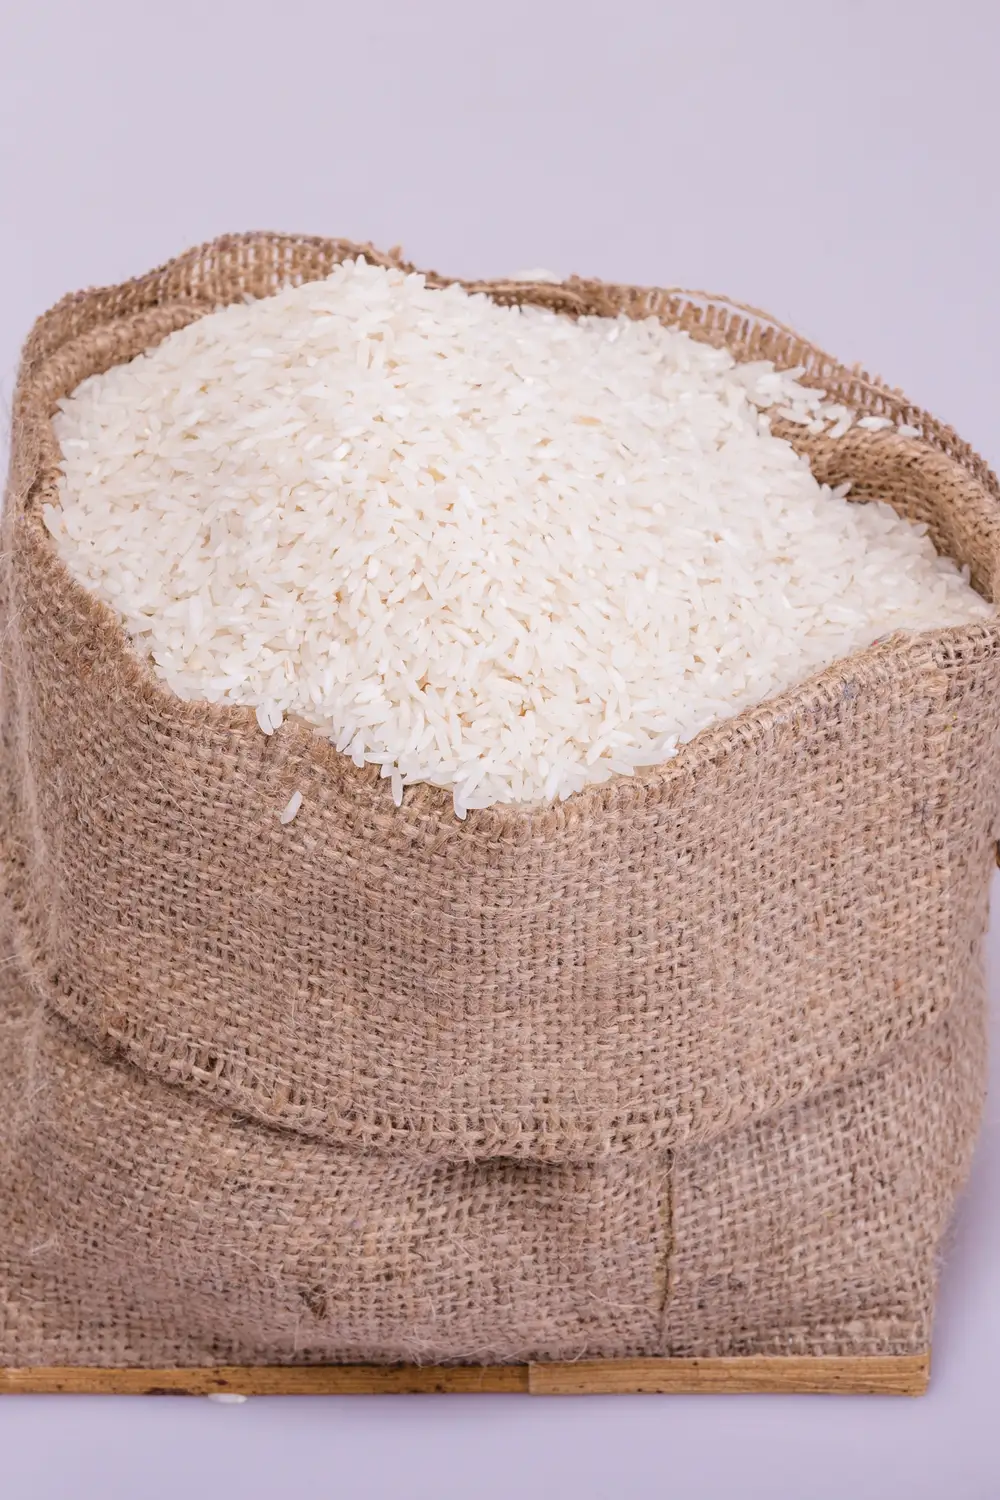 Sack bag filled with white rice grains